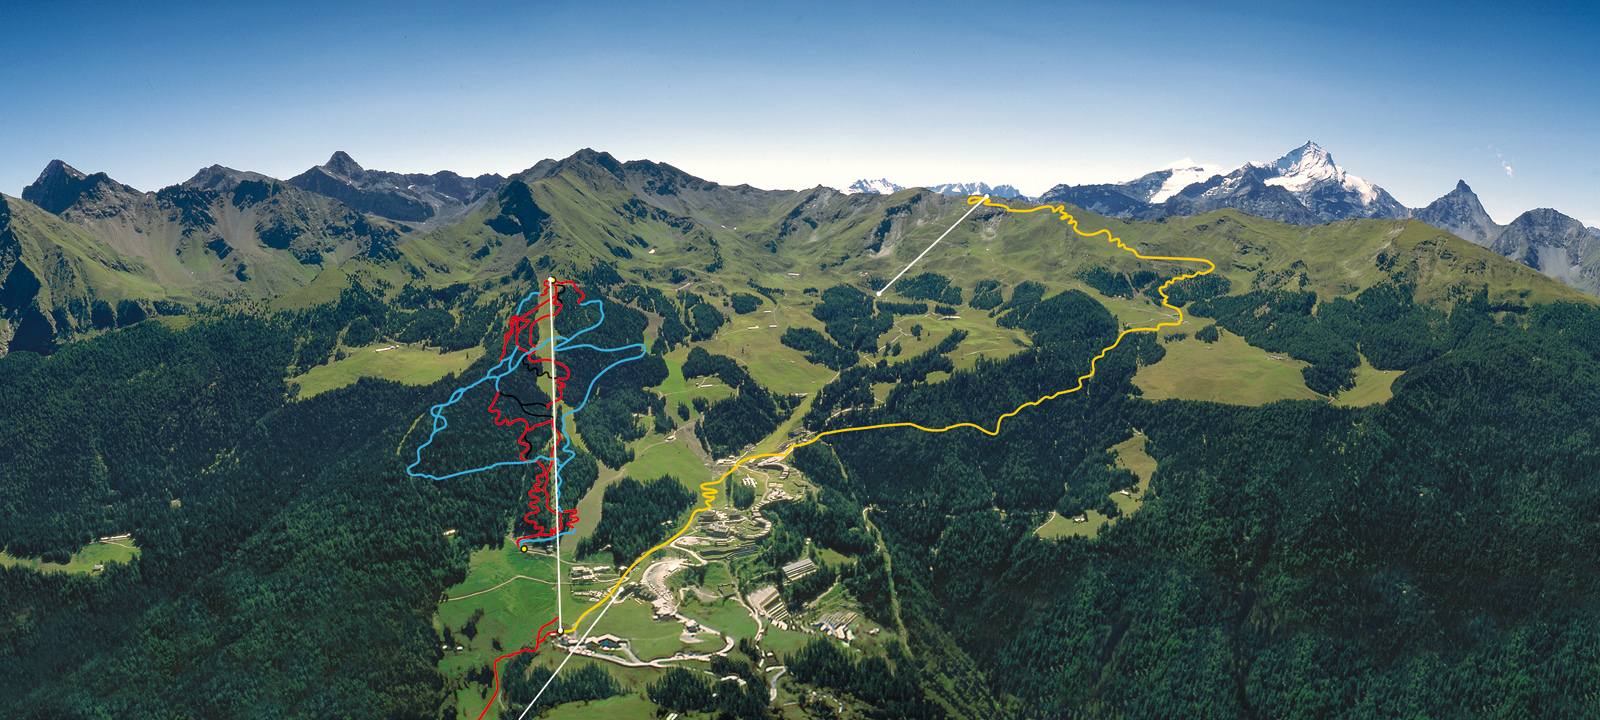 Cyle routes during summer 2012